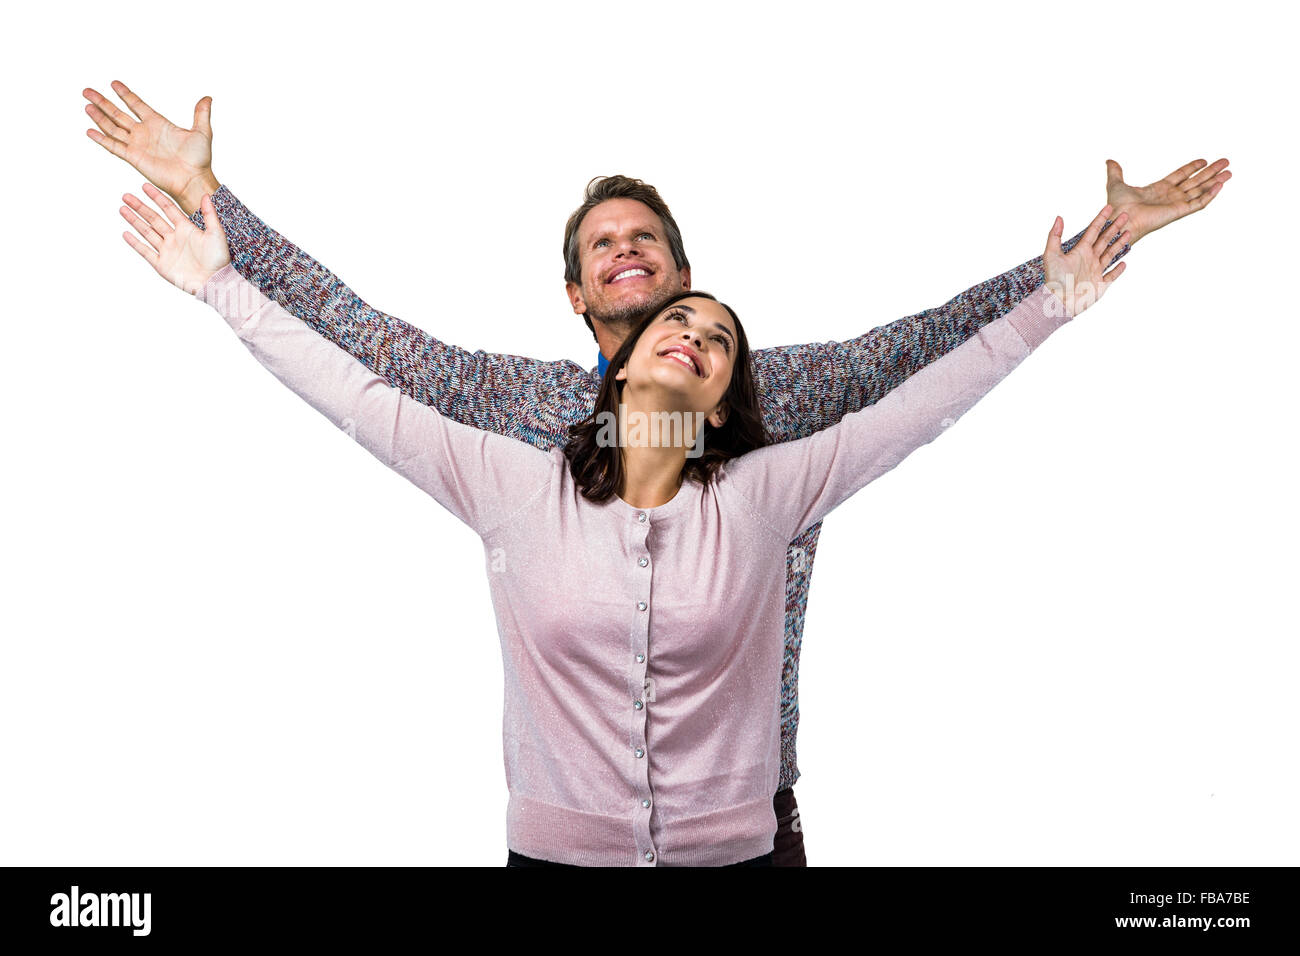 Smiling couple with arms raised Stock Photo